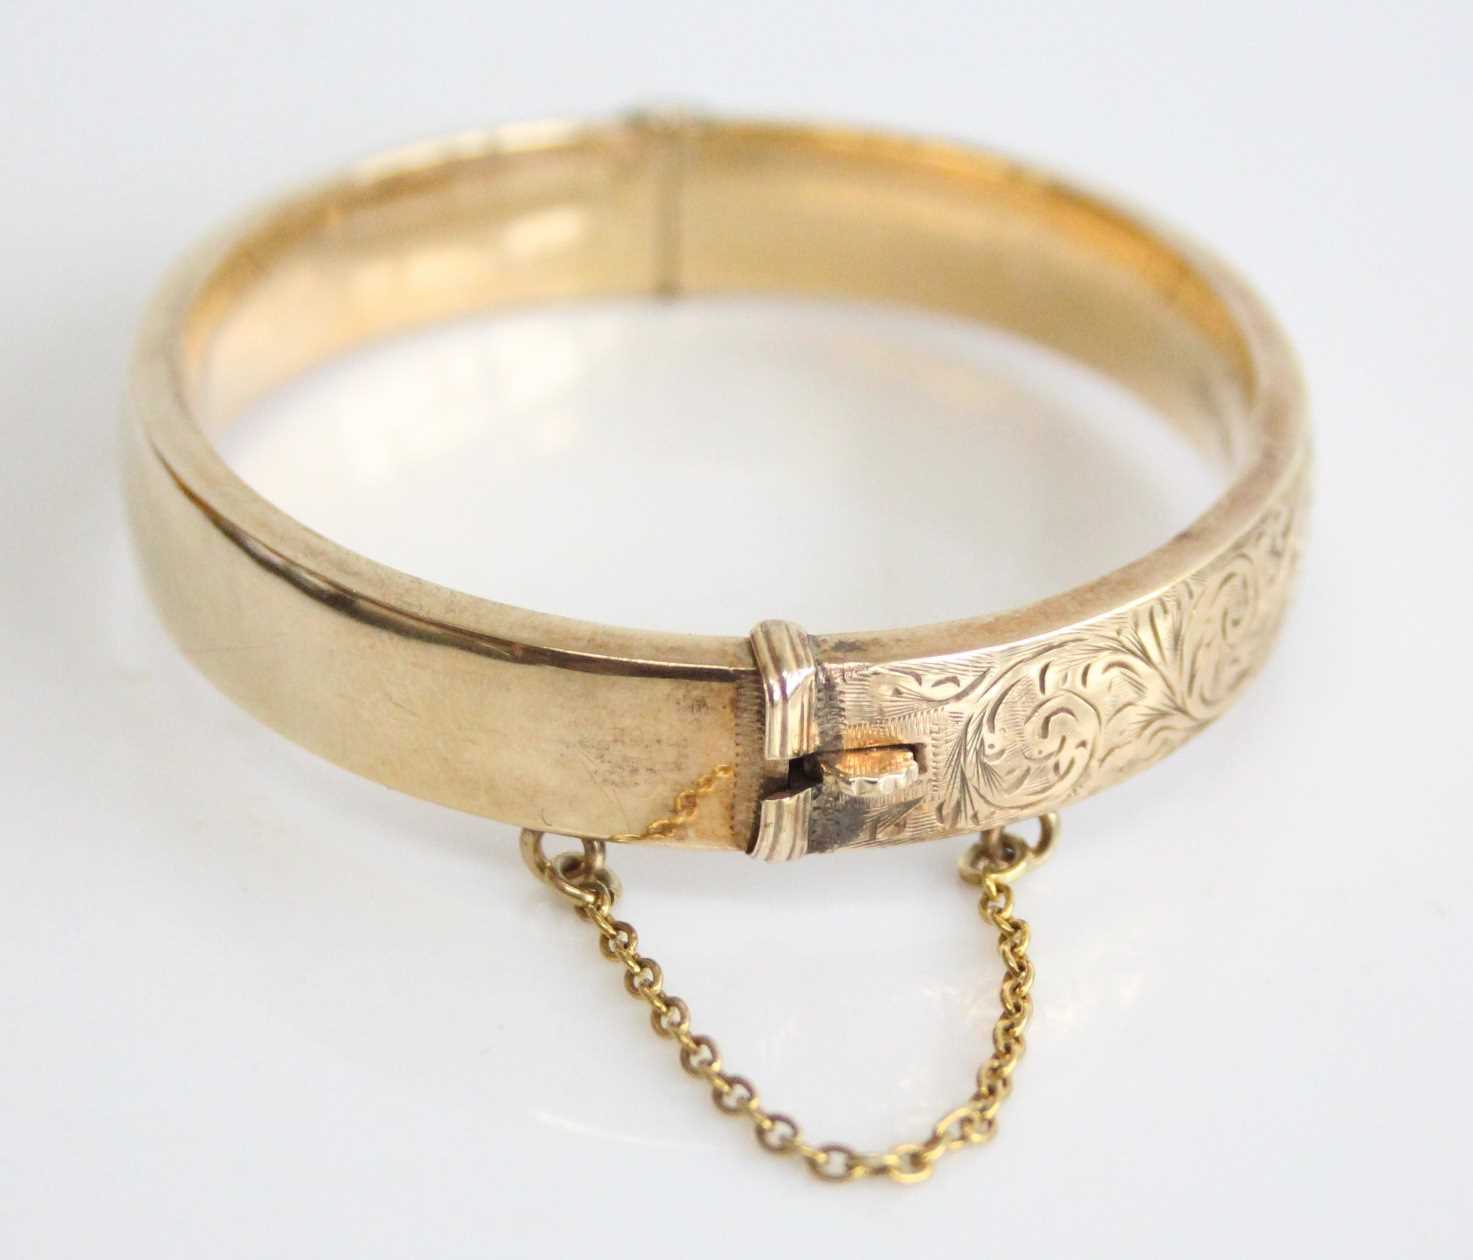 A 9ct yellow gold oval hinged hollow bangle, half engraved with scrollwork detail, with a box - Image 4 of 6